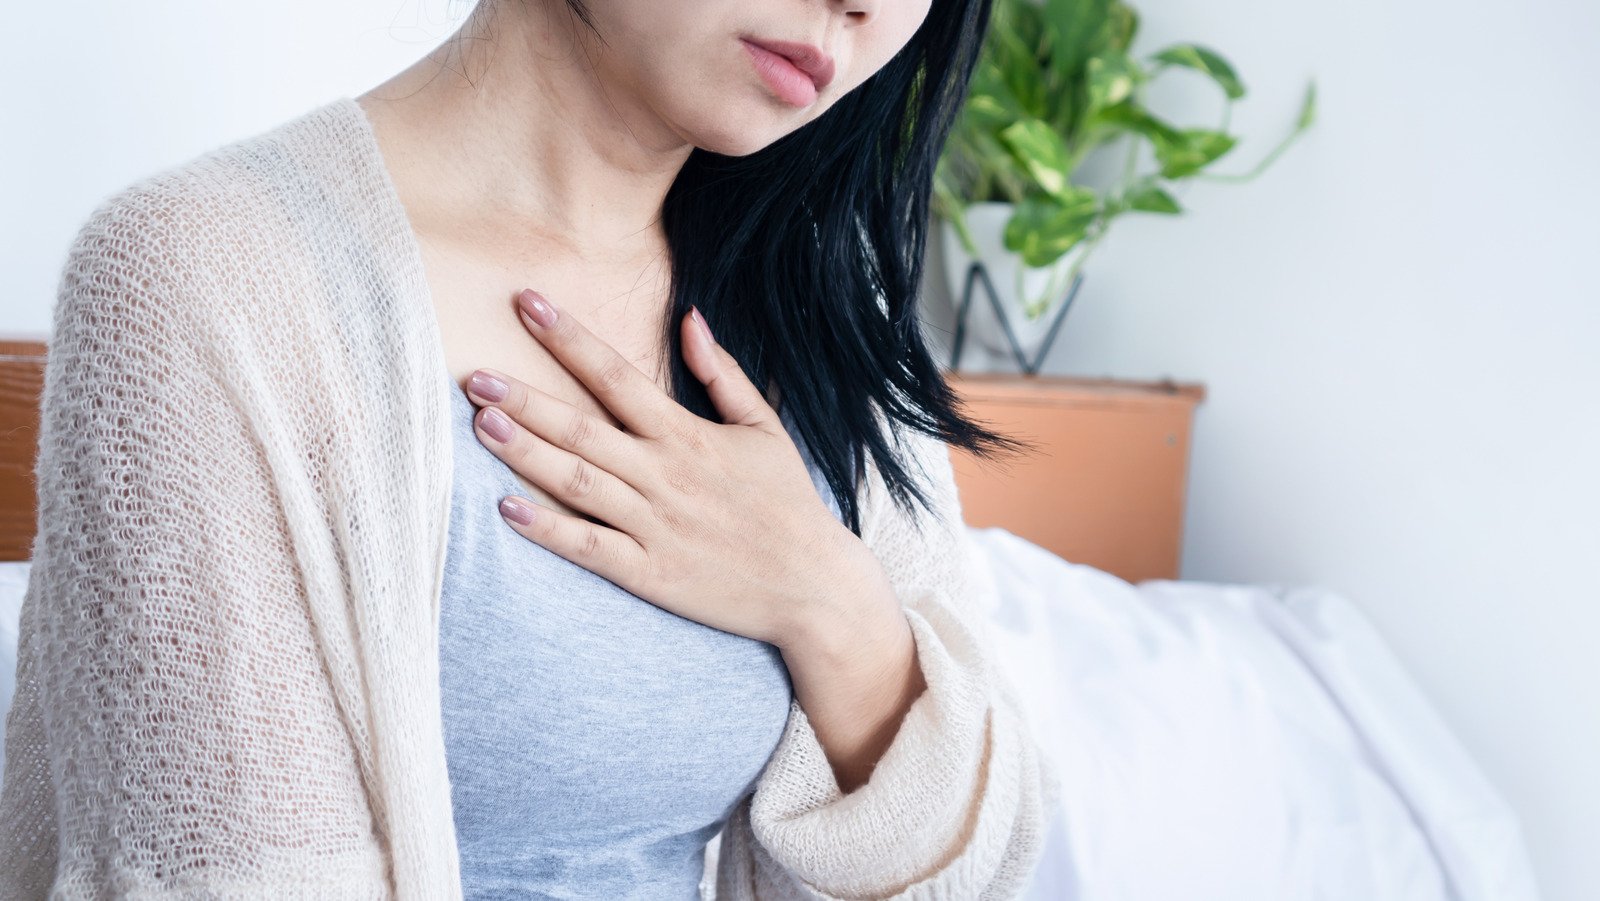 Heartburn Explained: Causes, Symptoms, And Treatments